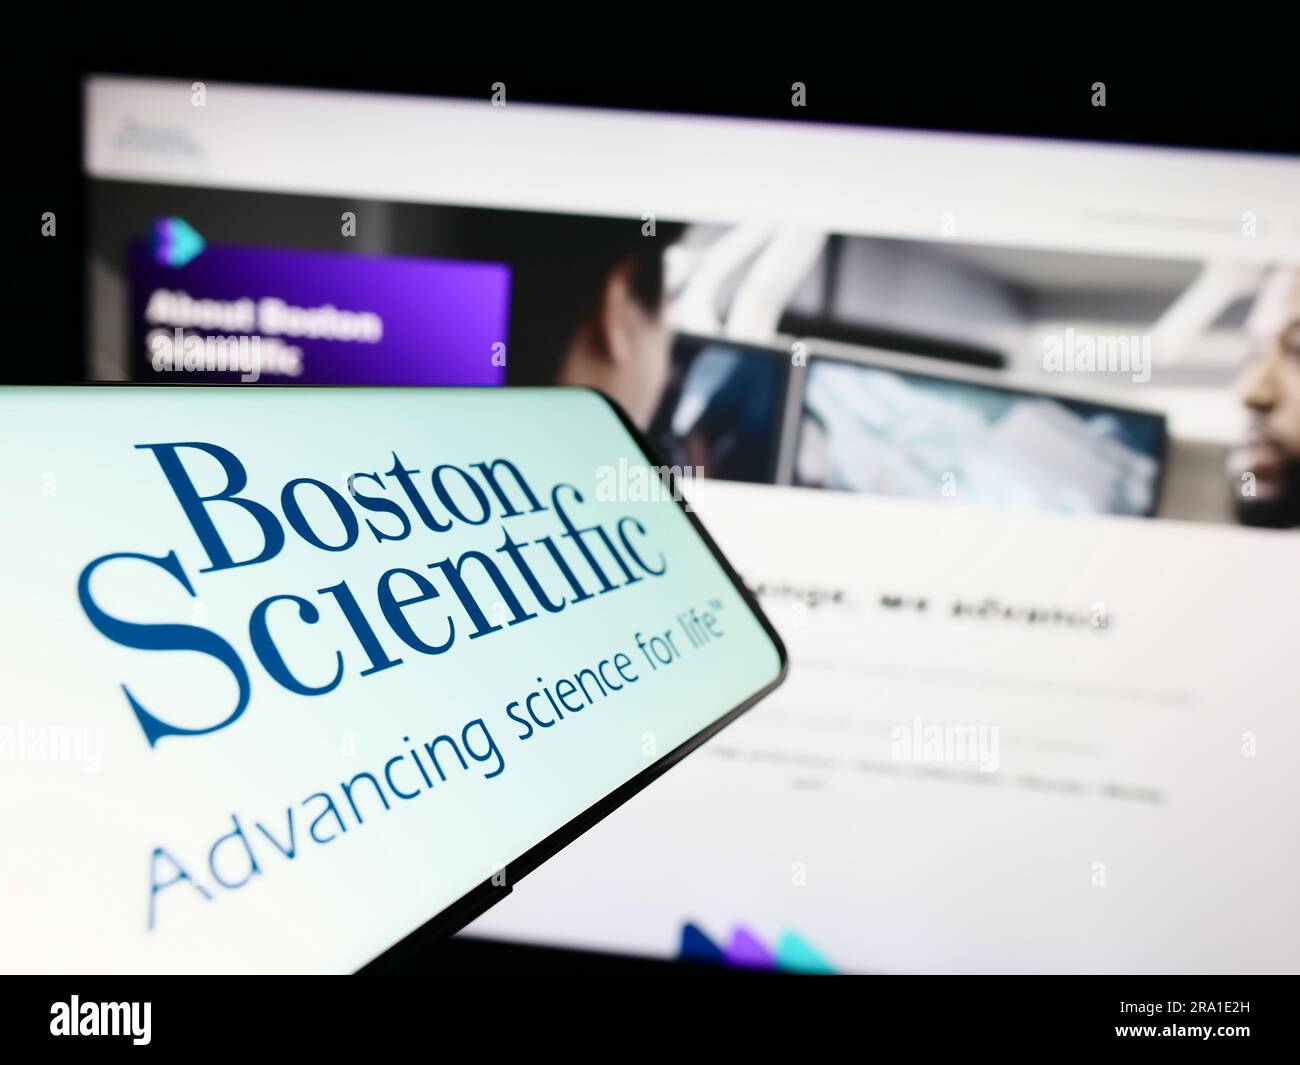 Smartphone with logo of American company Boston Scientific Corporation on screen in front of business website. Focus on center of phone display. Stock Photo